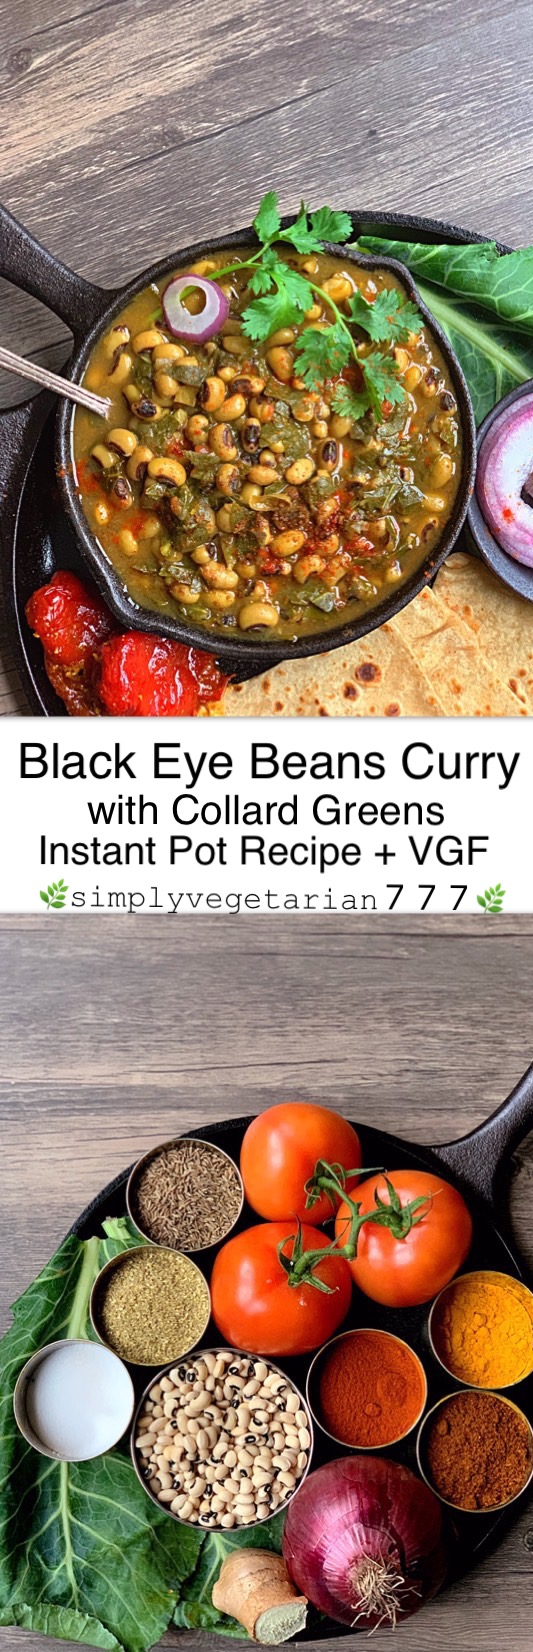 Black Eyed Peas Curry is a super delicious curry made in Instant Pot. It is a vegan and glutenfree stew. Warm Indian Spices make it perfect for any season. #collardgreensbeans #instantpotbeans #instantpotvegetarian #instantpotrecipes #blackeyedpeascollardgreens #newyearsbeansandgreens #blackeyedpeascurry #instantpotstew